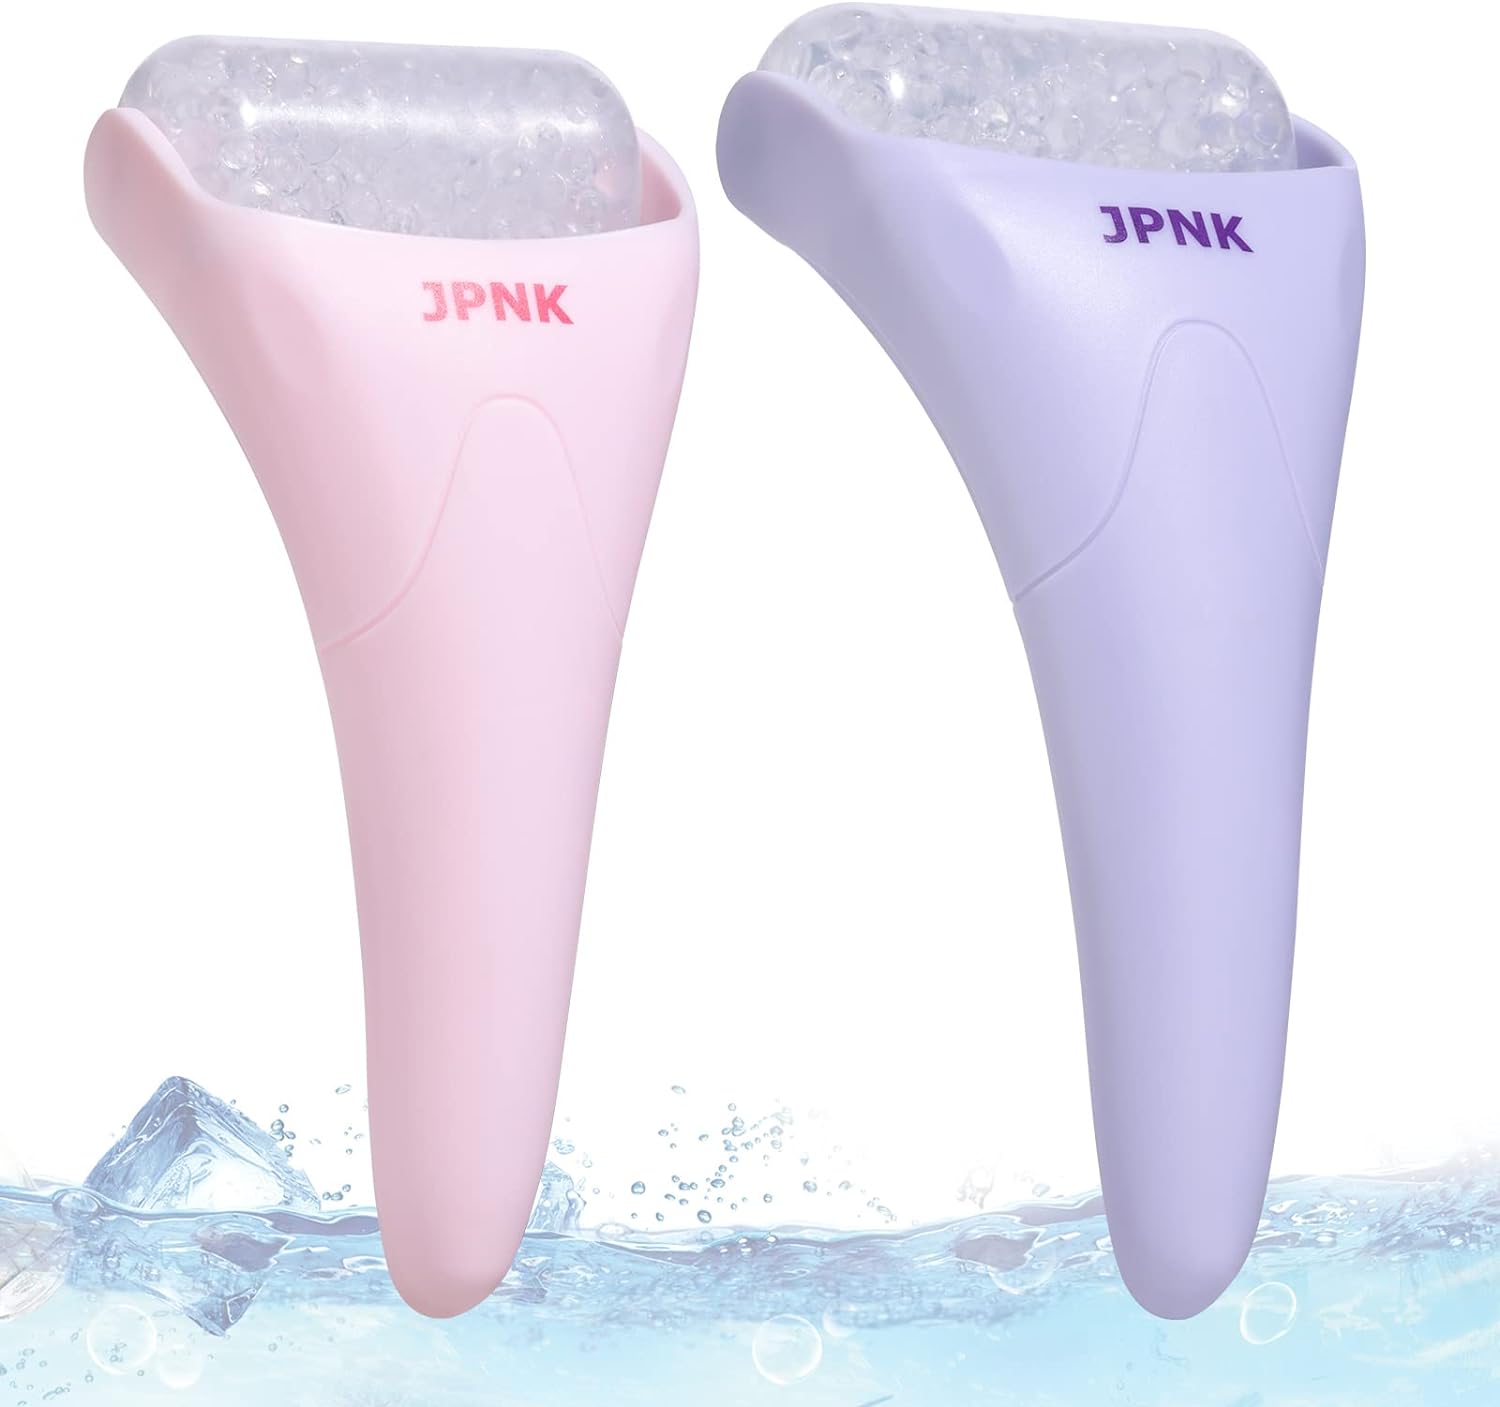 JPNK 2PCS Ice Roller for Face & Eye Plus Extra Head - Cold Facial Skincare Massager for Eye Puffiness, Pain and Migraine Relief for Women